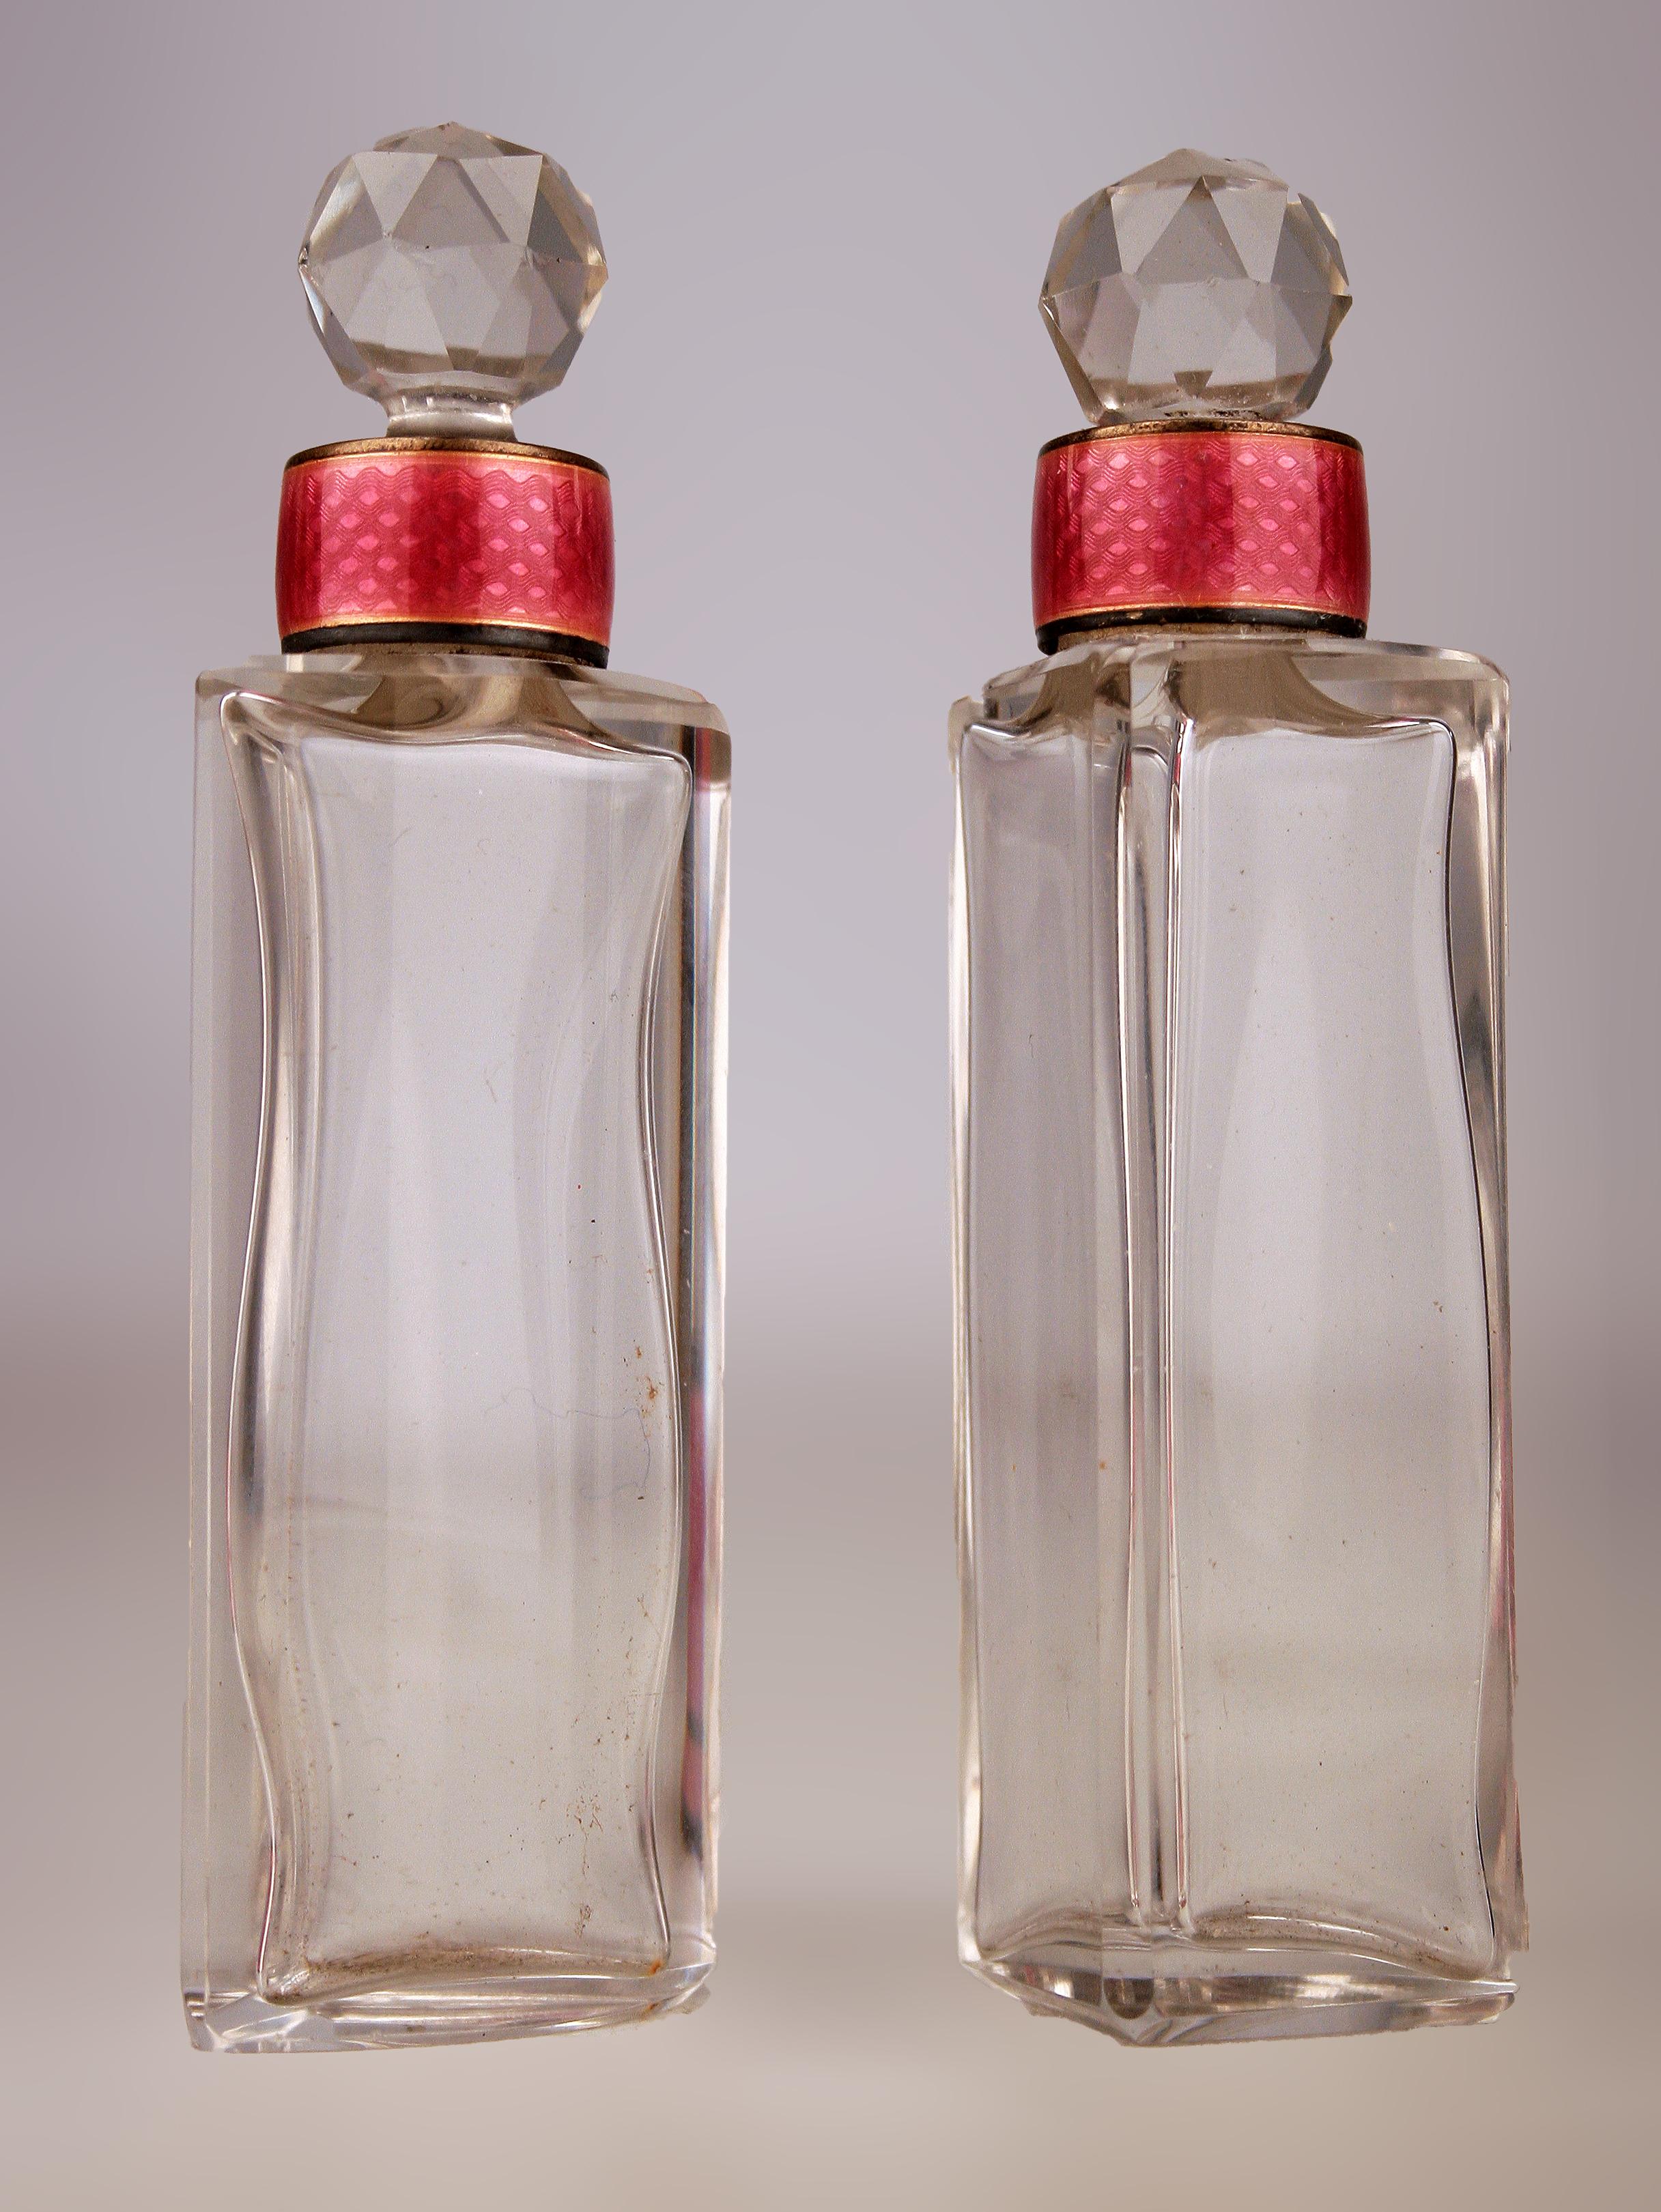 Molded 20th C. English Set of Guilloche Enamel Perfume Glass Bottles with Silver Base For Sale